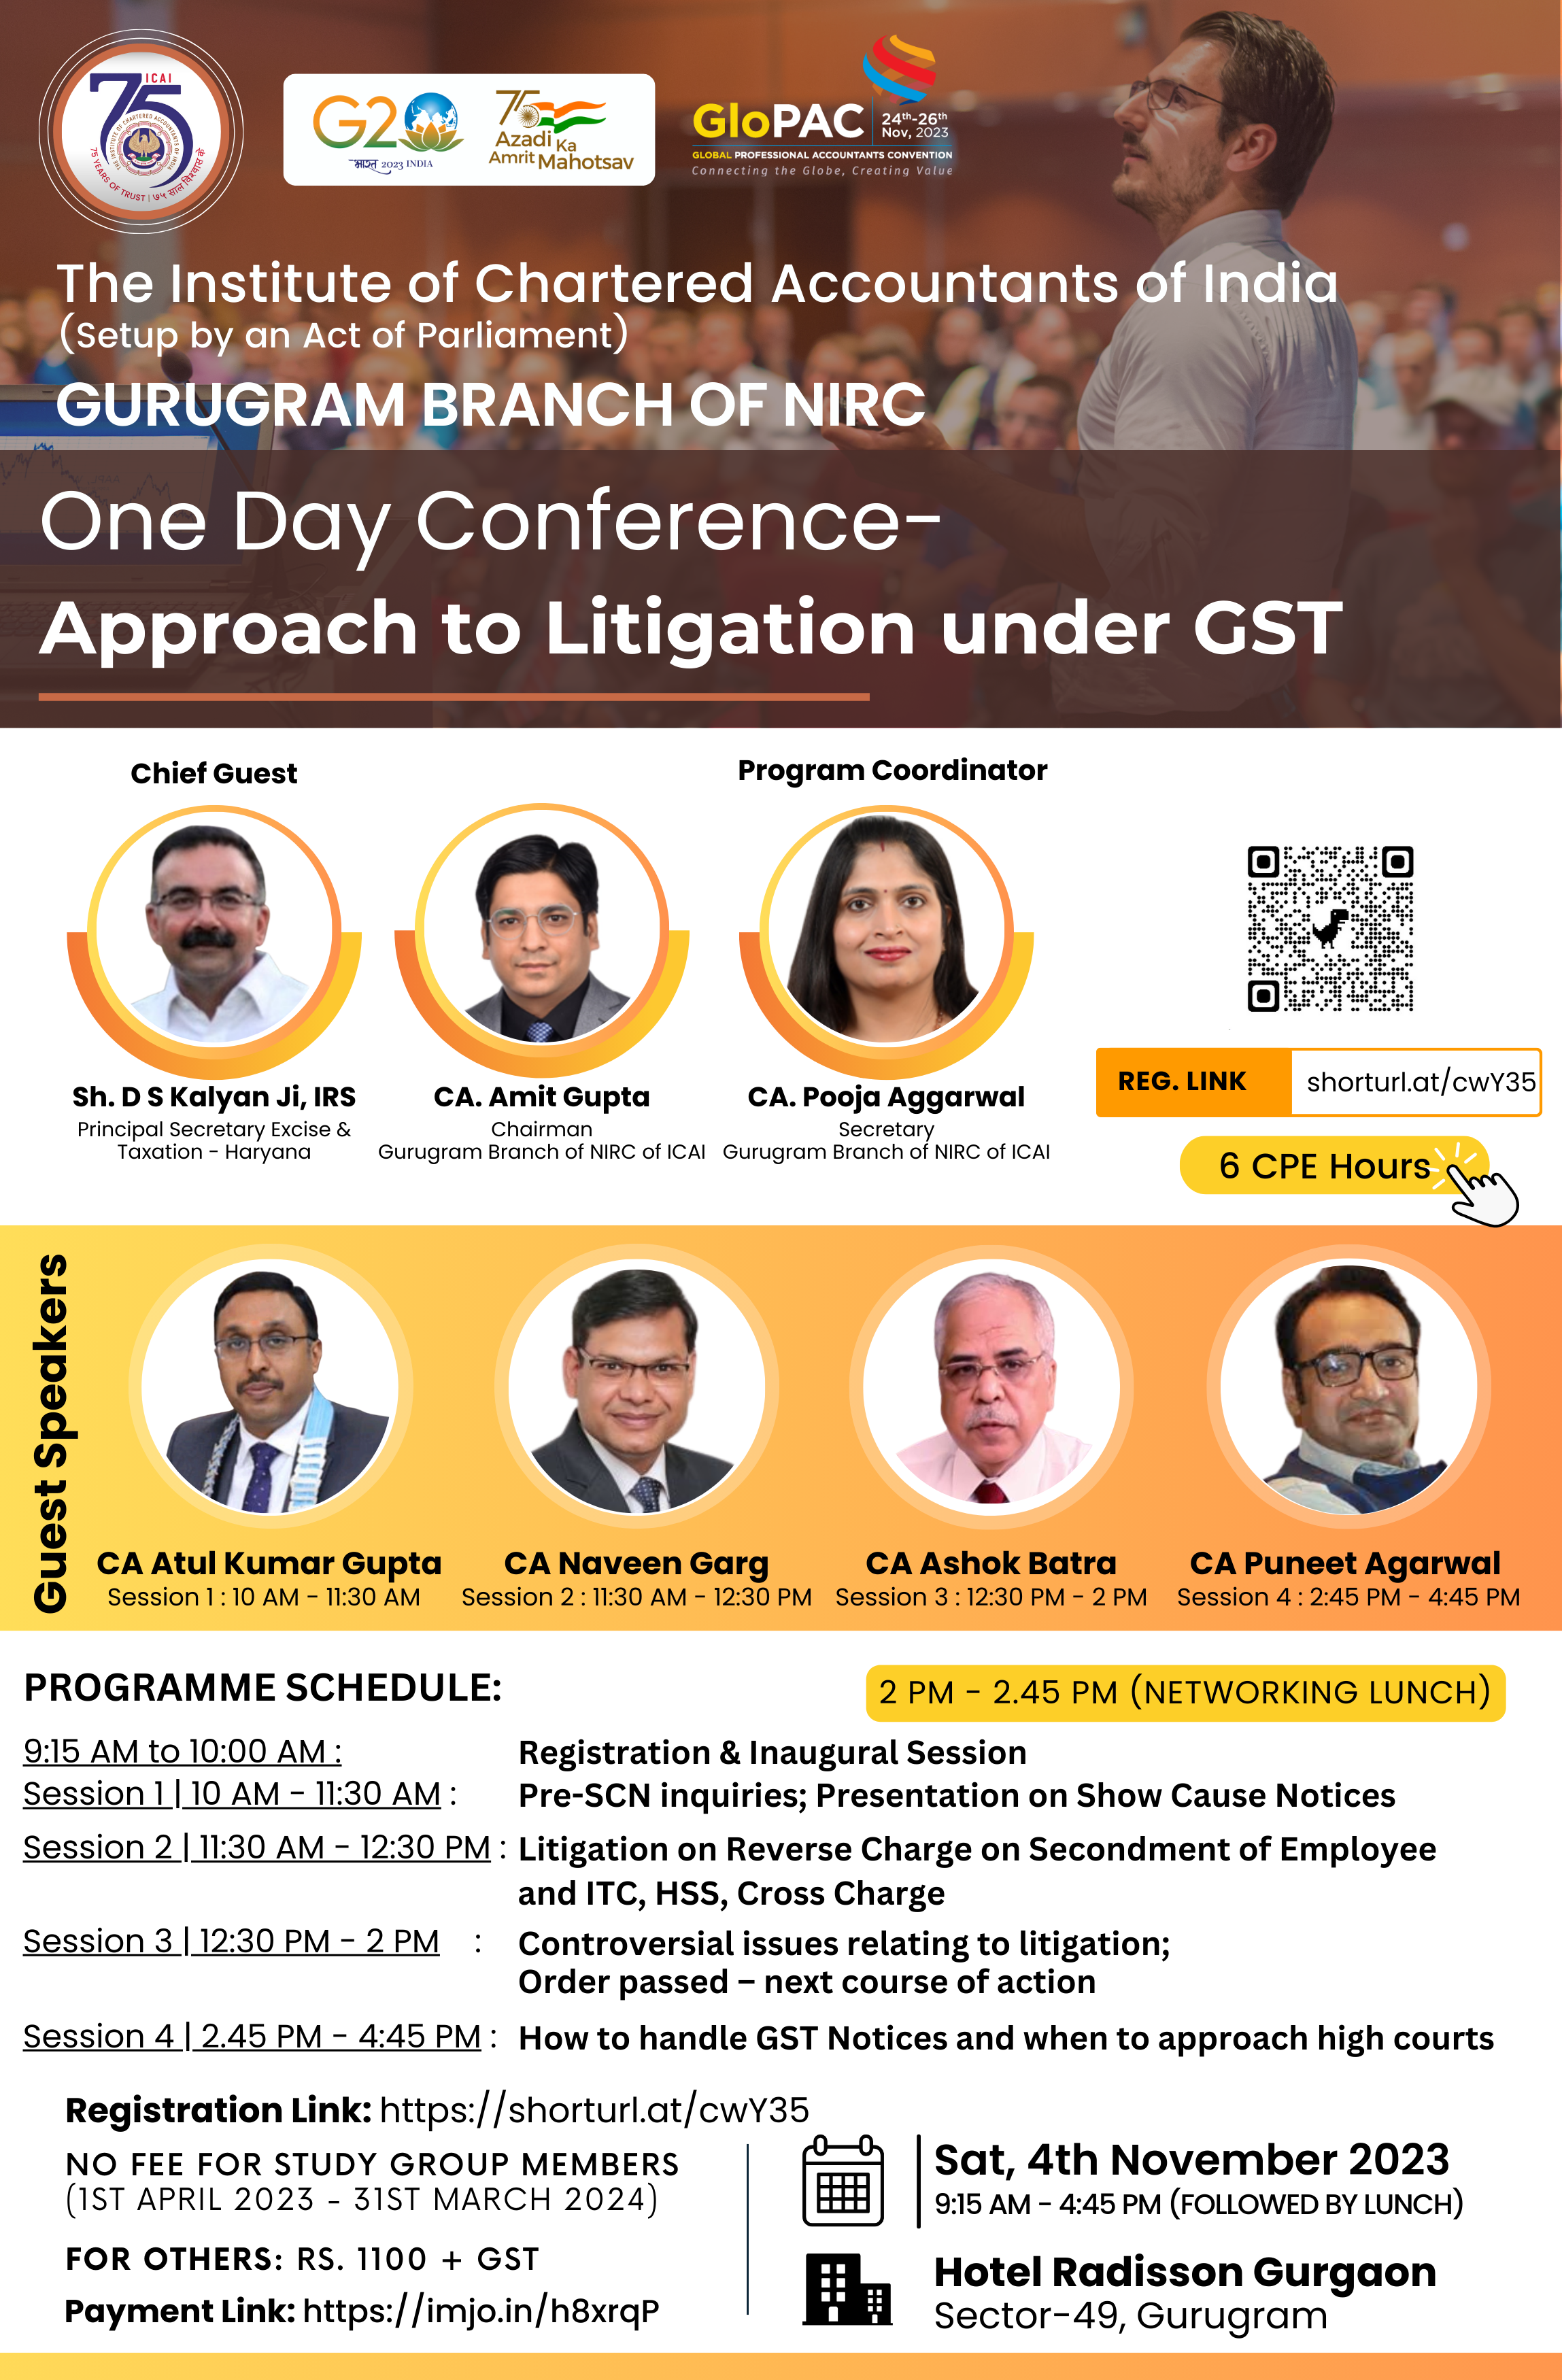 One Day Conference - Approach to Litigation under GST